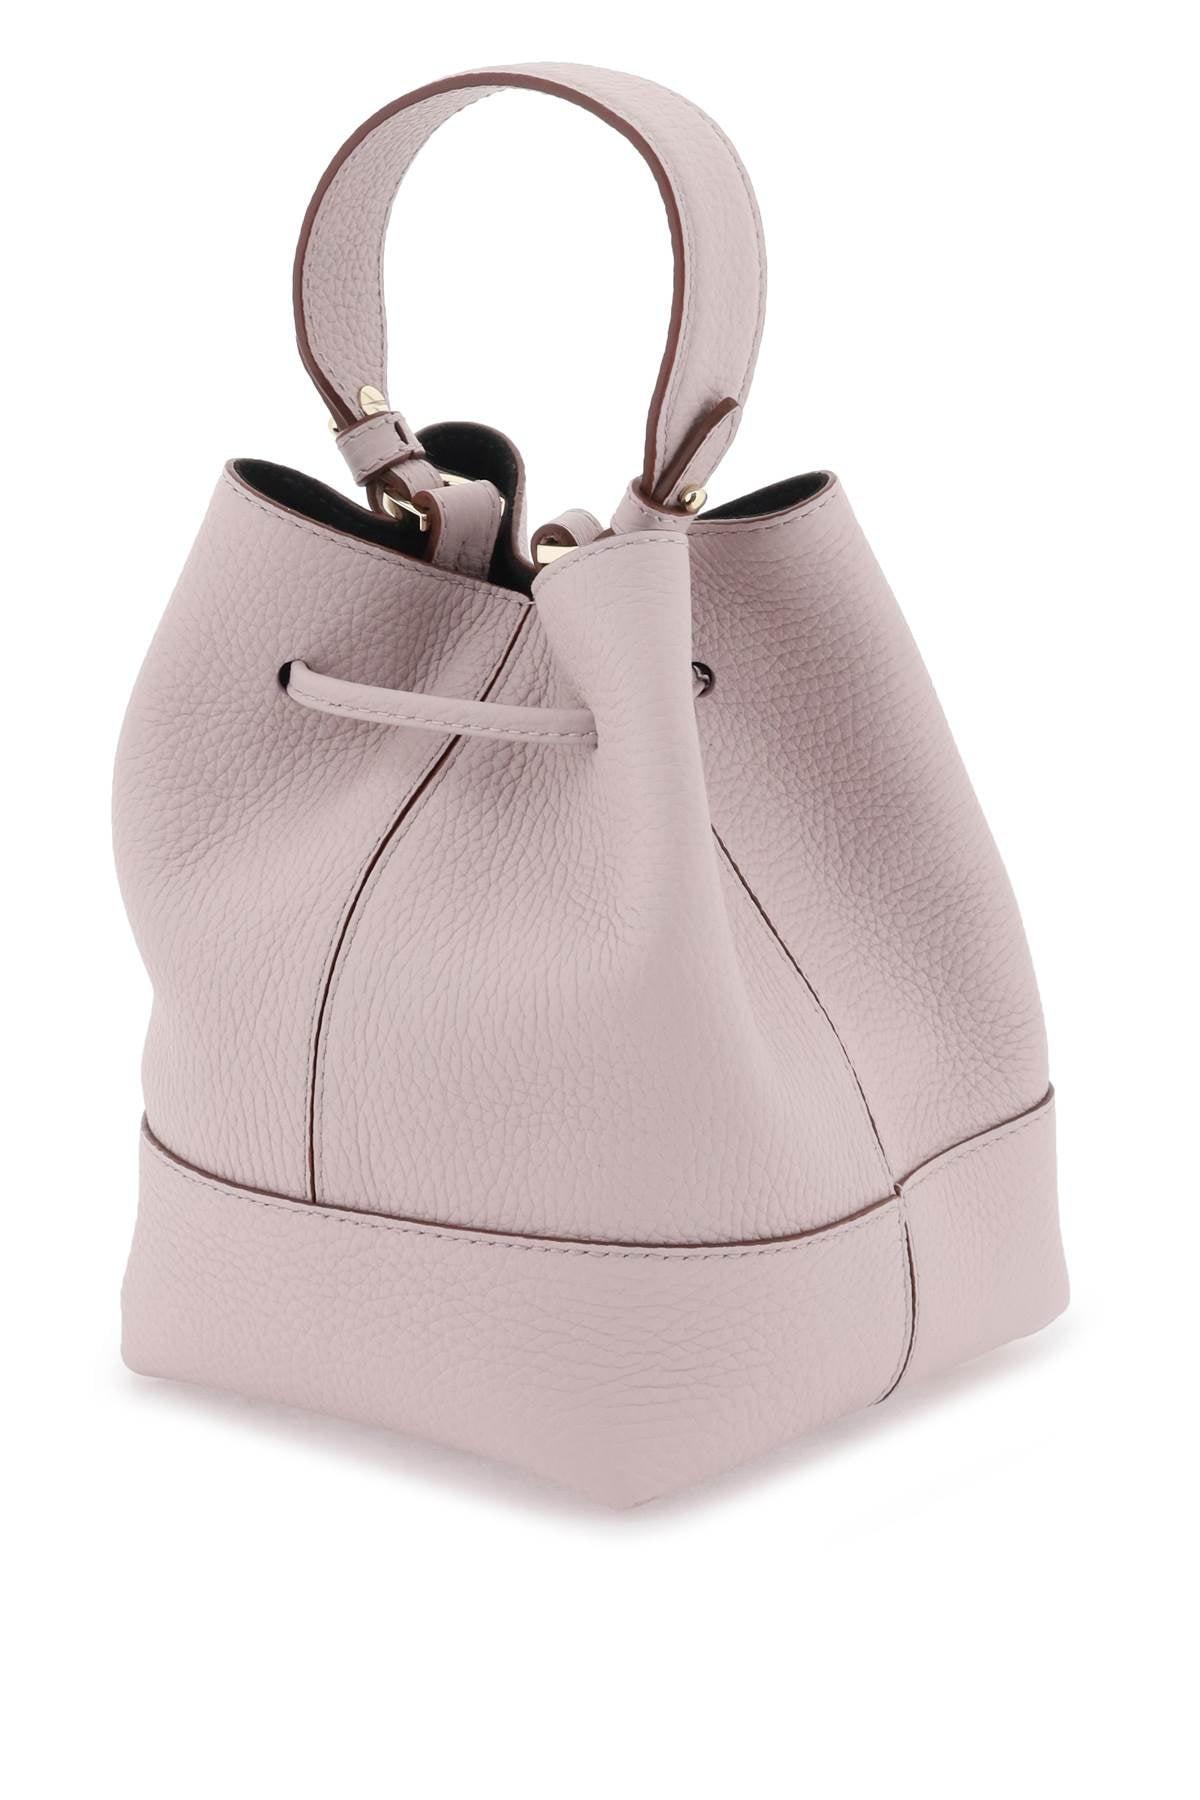 Strathberry Small Leather Lana Osette Bucket Bag in Orange